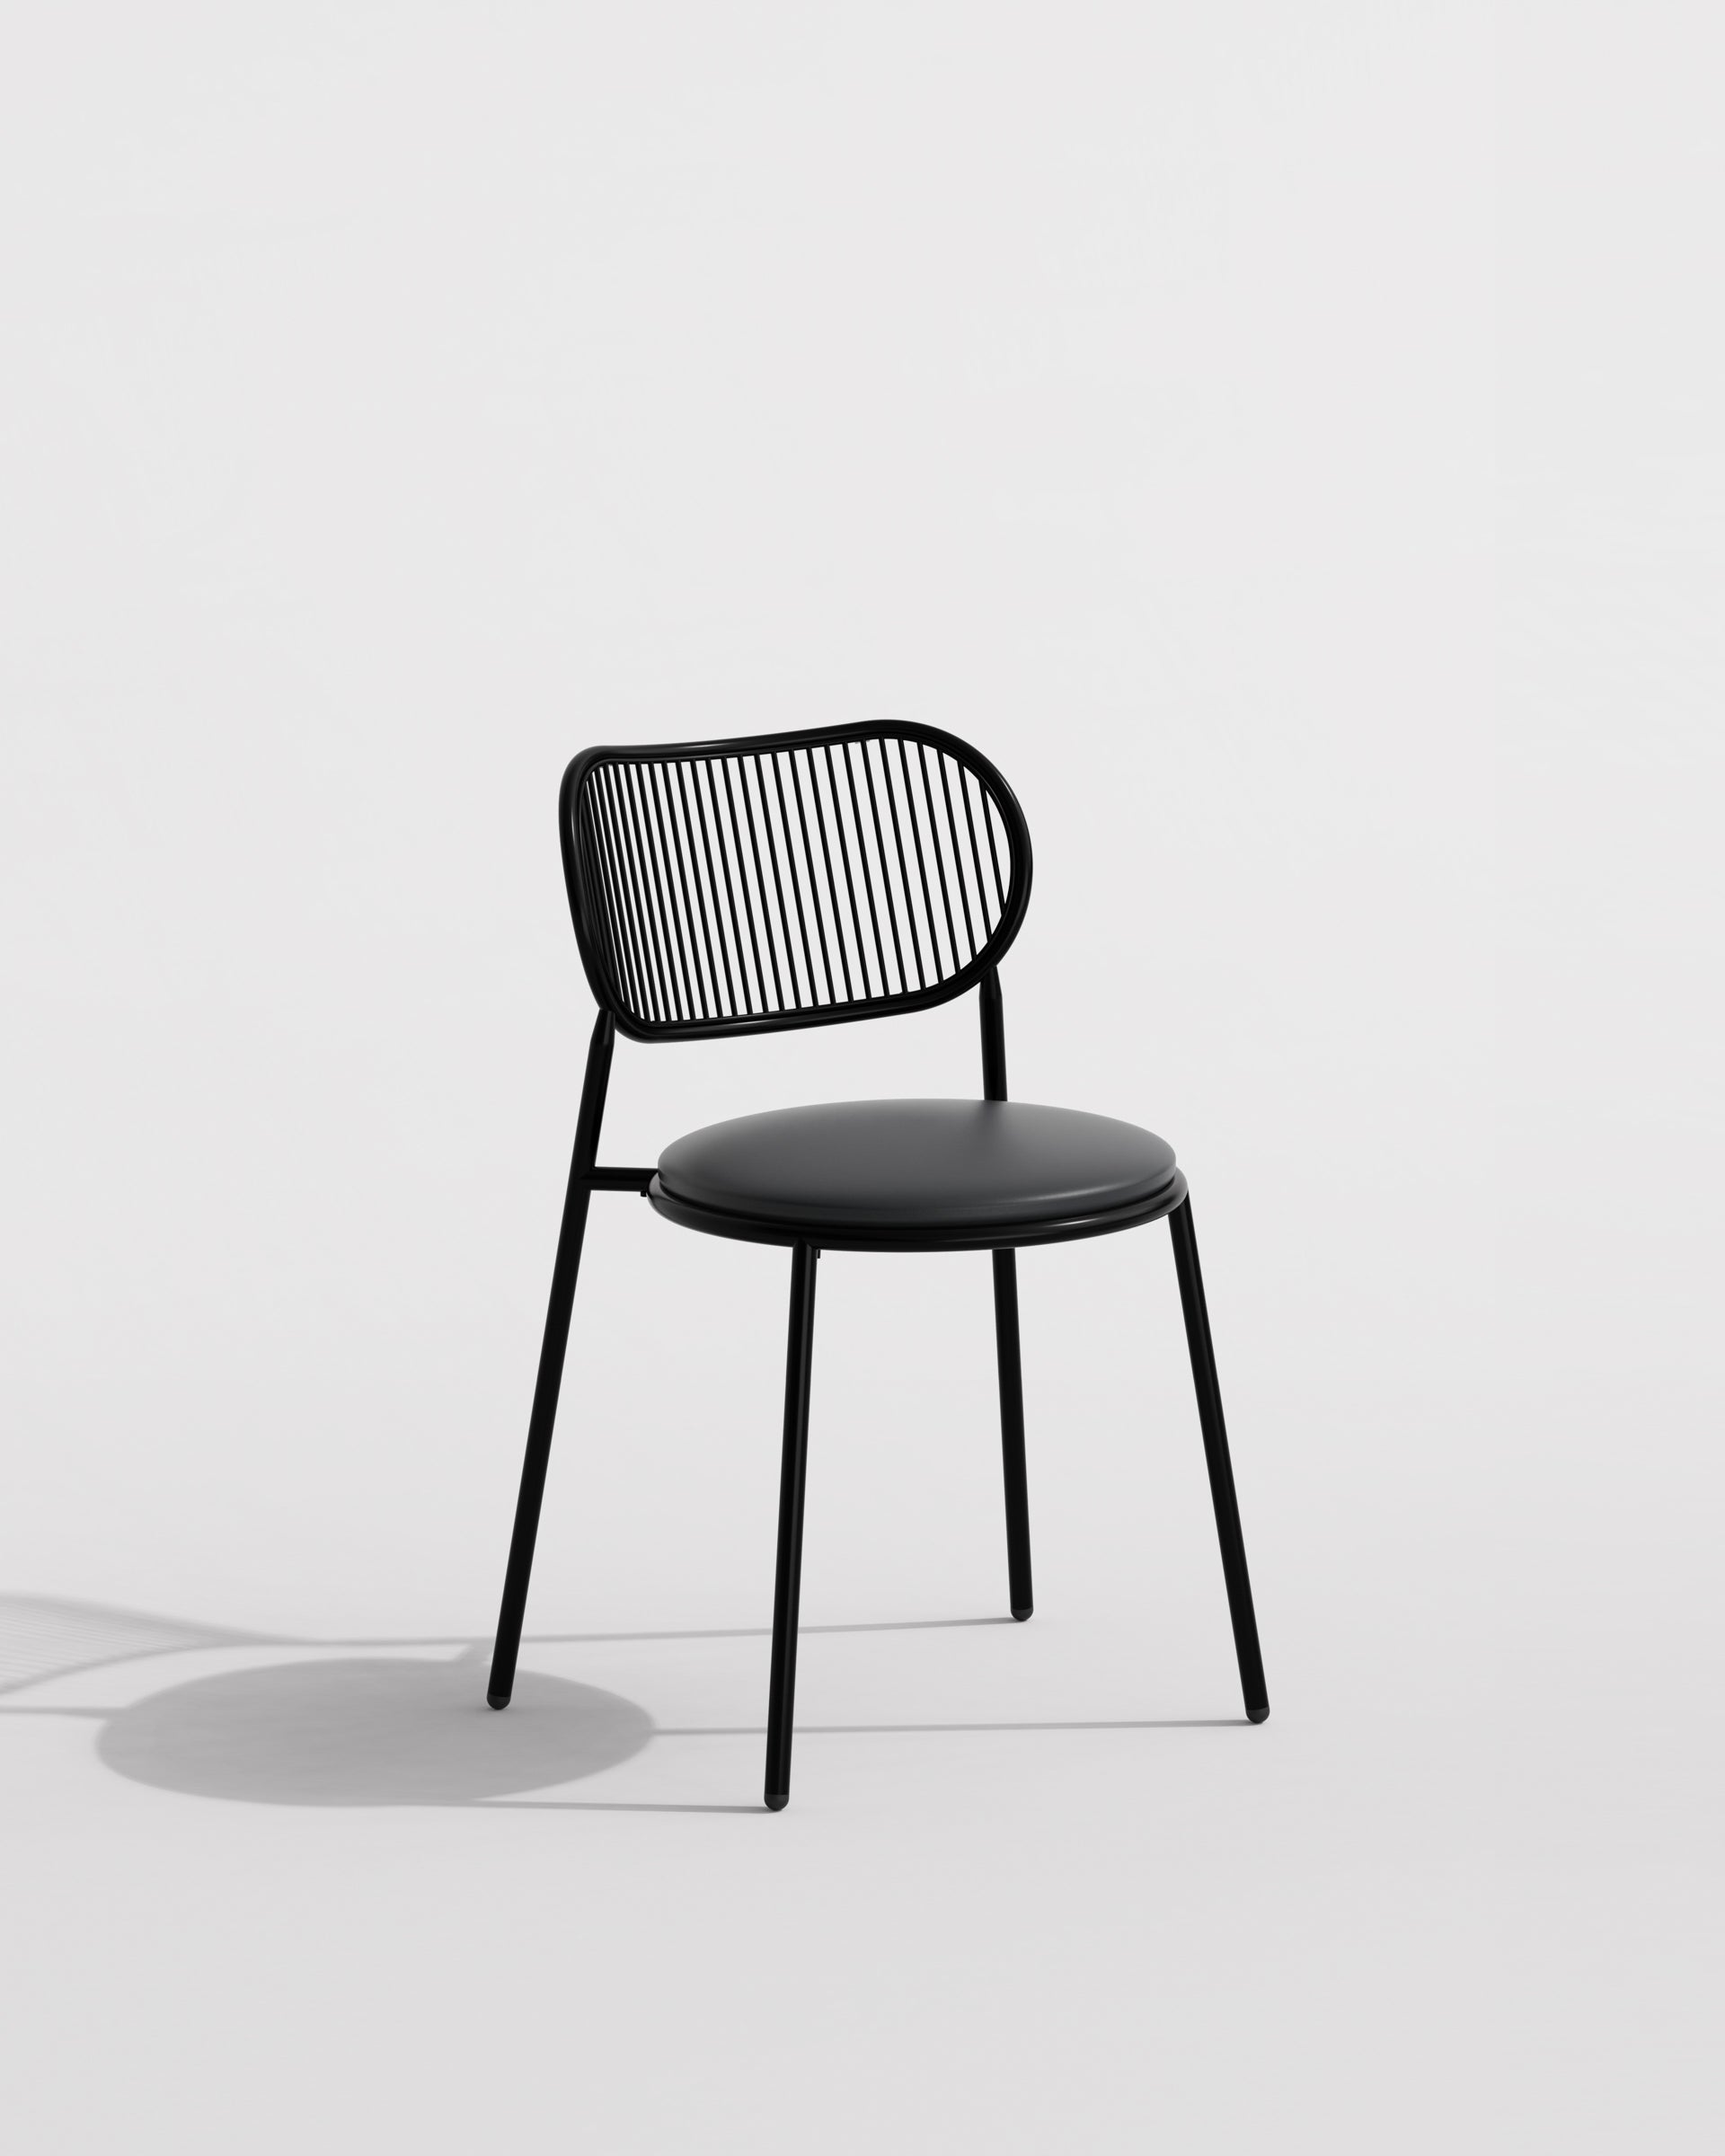 Piper Dining Chair Upholstered | Fabric or Leather Seat Stackable | Designed by GibsonKarlo | DesignByThem | ** Maharam Lariat (Vinyl) 006 Black